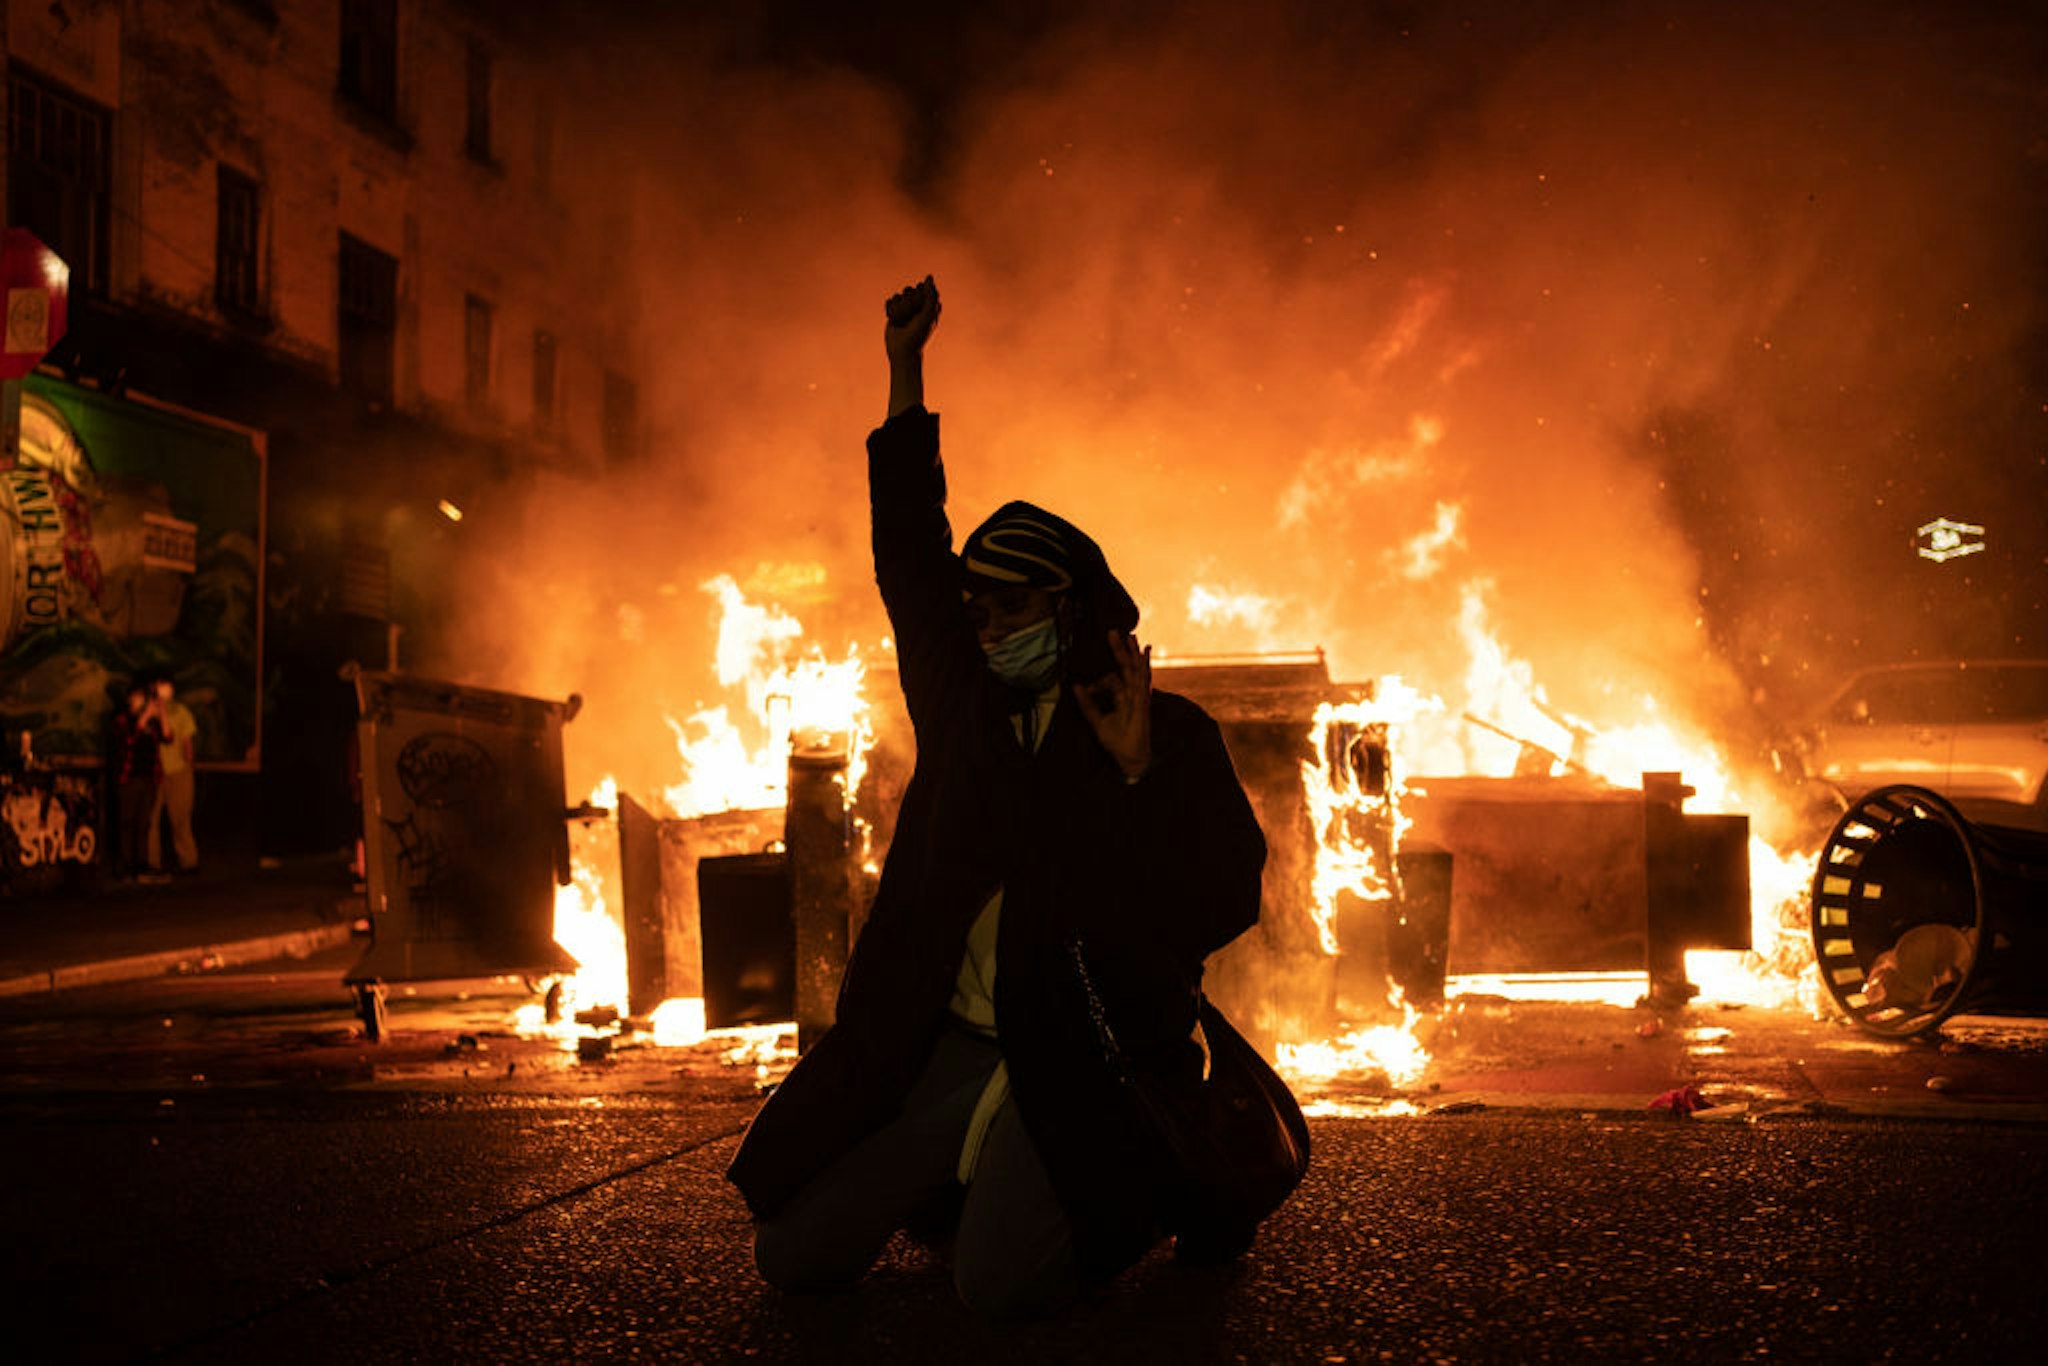 SEATTLE, WA - JUNE 08: A demonstrator raises their fist as a fire burns in the street after clashes with law enforcement near the Seattle Police Departments East Precinct shortly after midnight on June 8, 2020 in Seattle, Washington. Earlier in the evening, a suspect drove into the crowd of protesters and shot one person, which happened after a day of peaceful protests across the city. Later, police and protesters clashed violently during ongoing Black Lives Matter demonstrations following the death of George Floyd. (Photo by David Ryder/Getty Images)